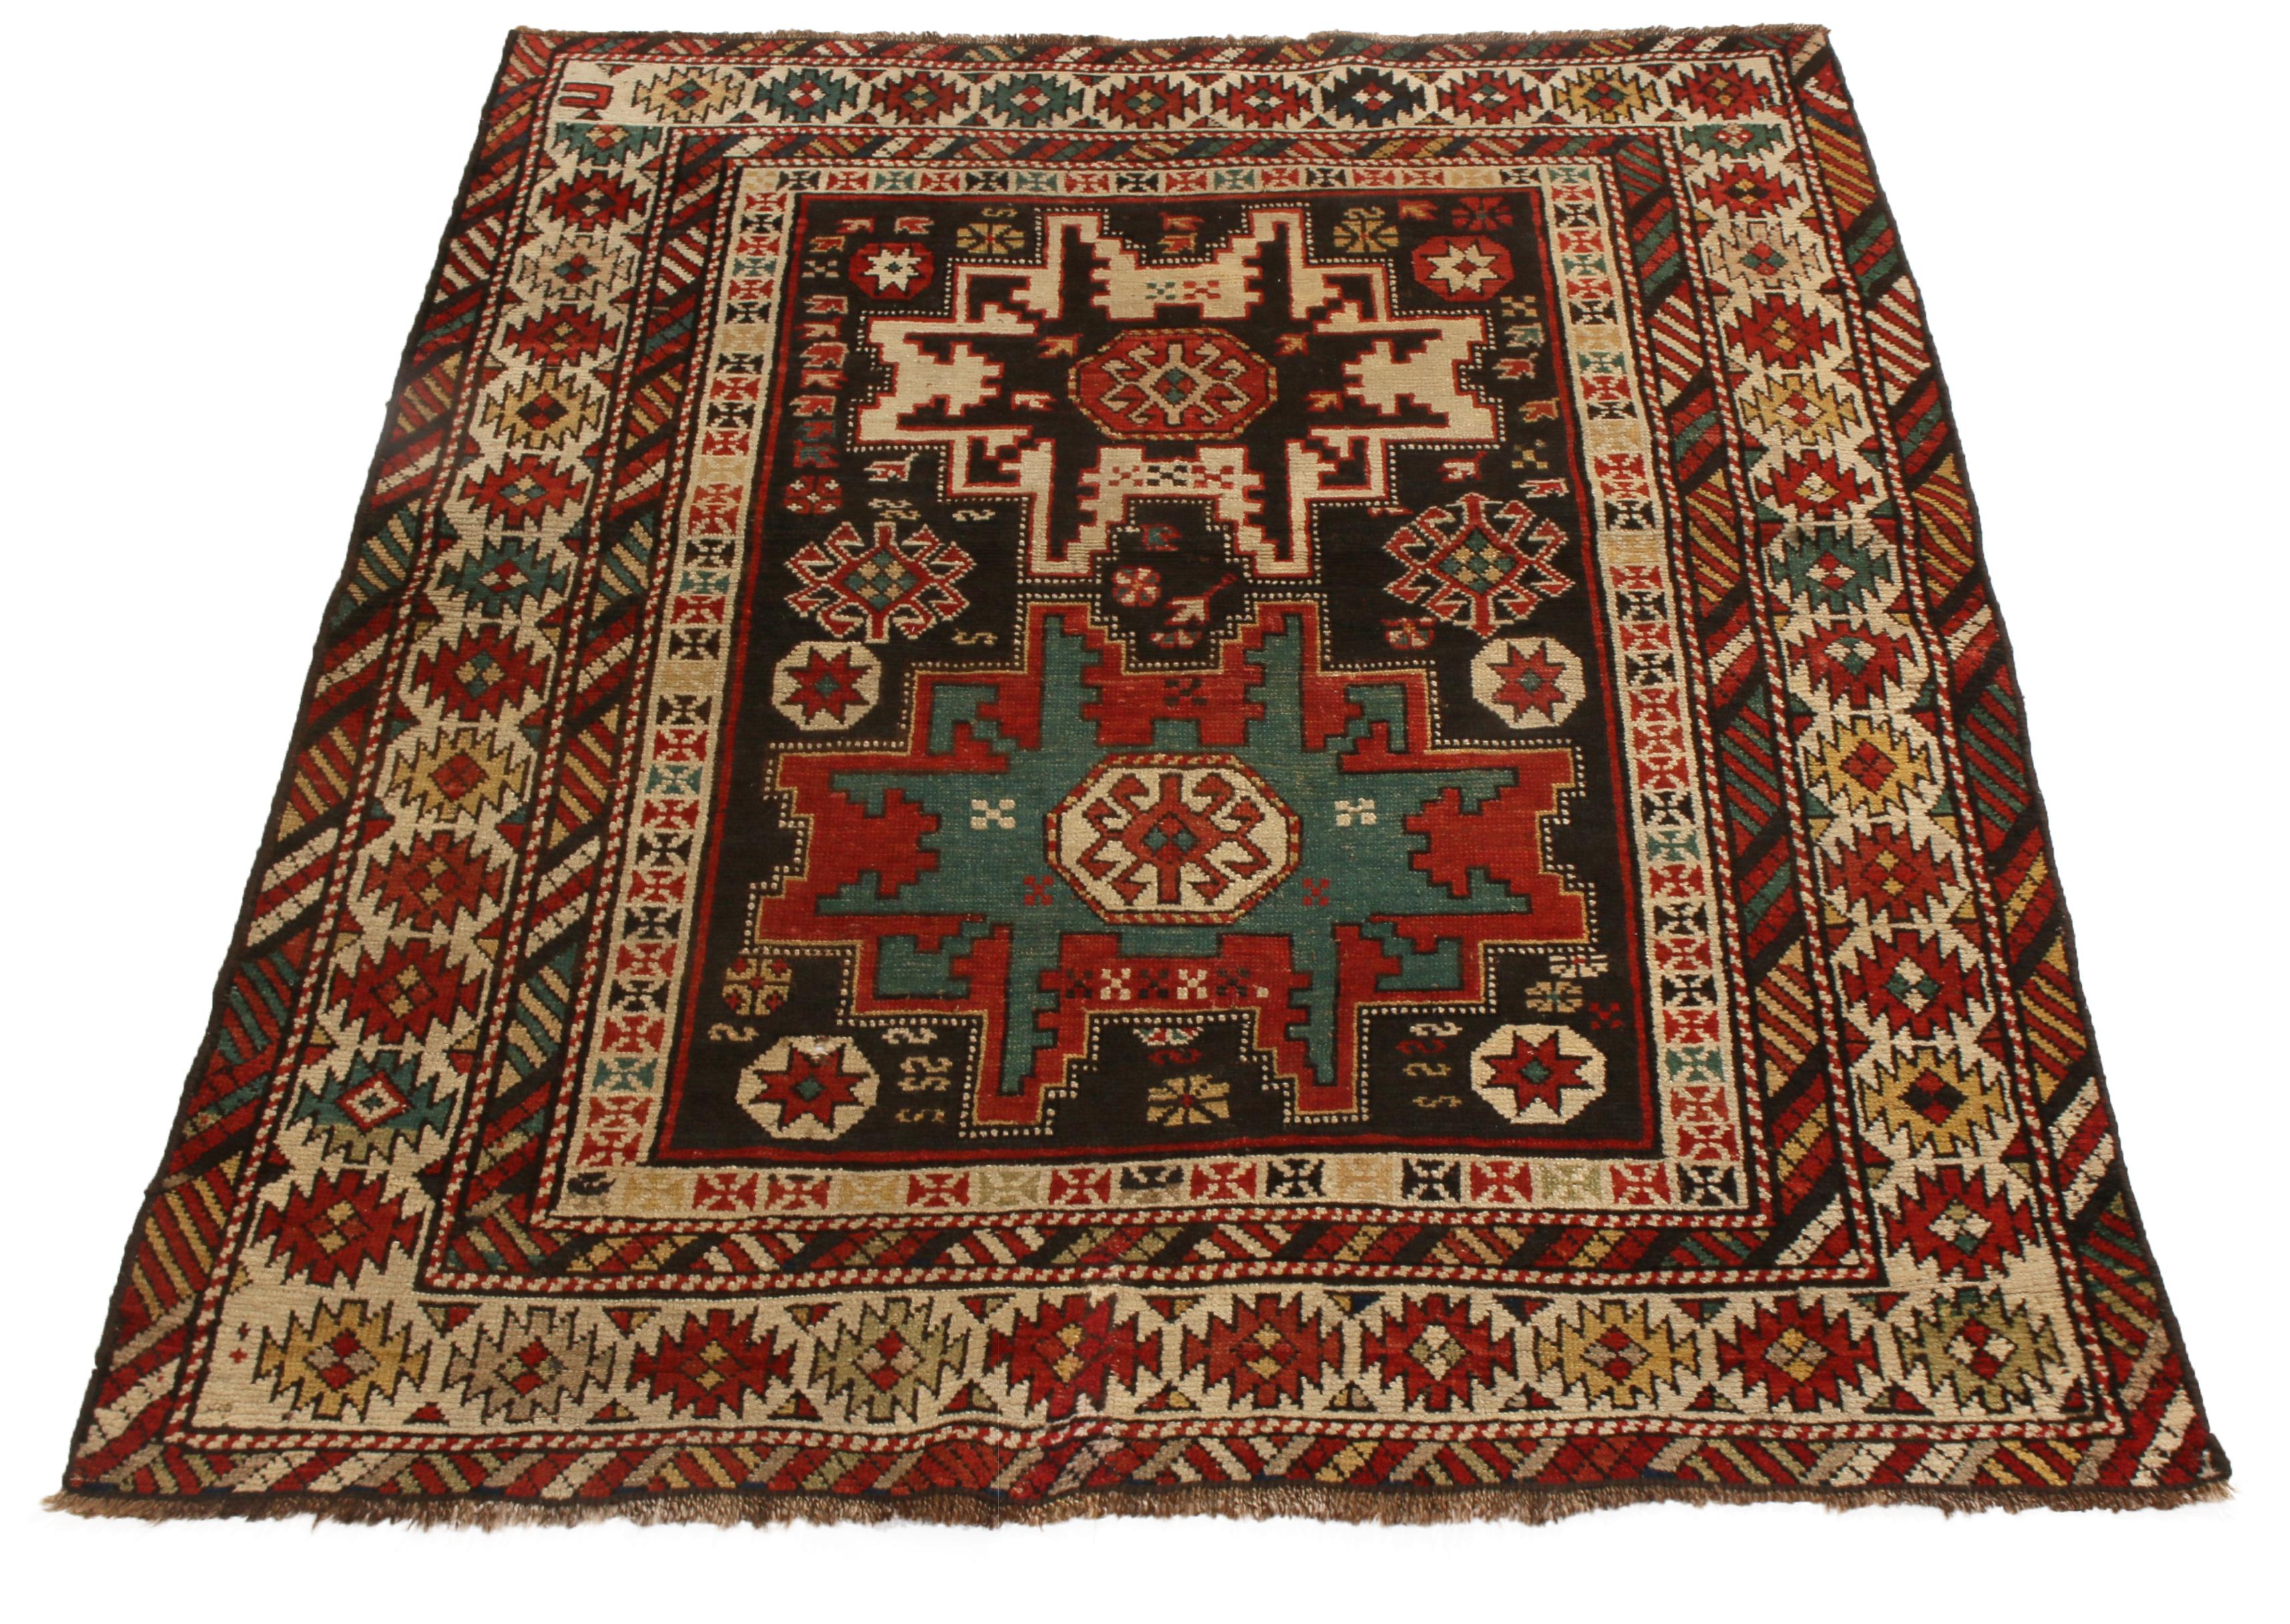 Originating from Russia in 1900, this antique traditional geometric rug features a distinct Lesgi Star design in tribal red, blue, beige, and black colorways. Hand knotted in high quality wool, this design dates back to as early as the 16th century,